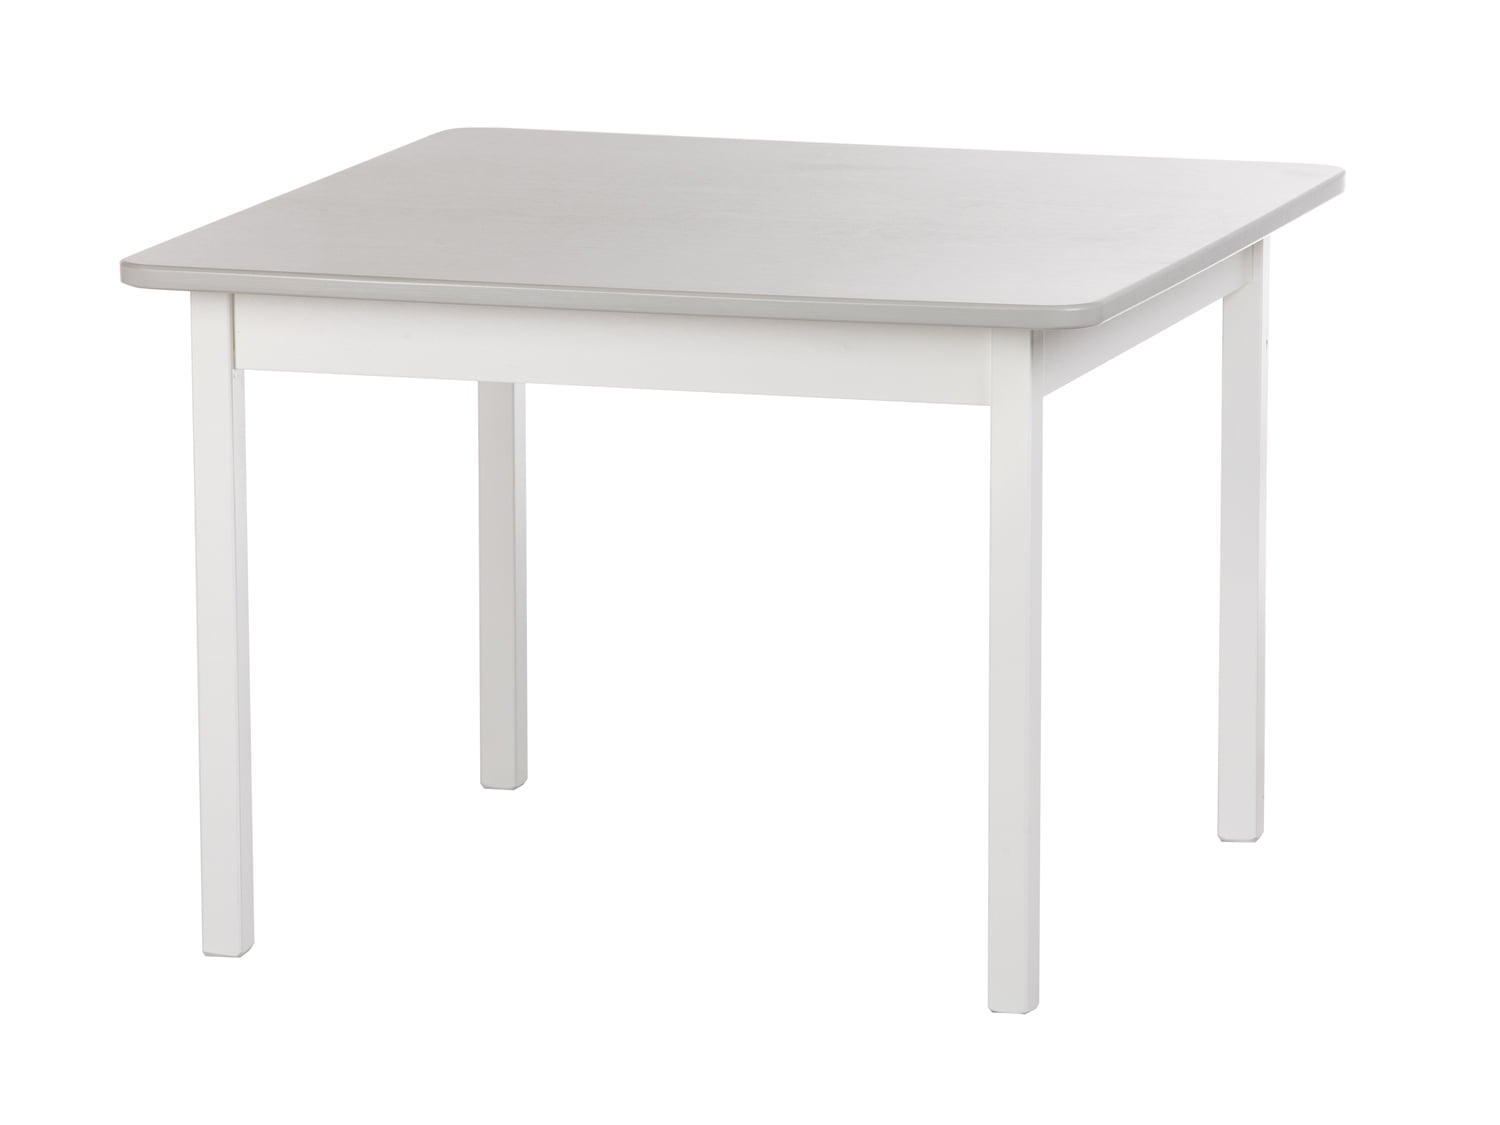 Child's Real Wood Table - White/ Grey